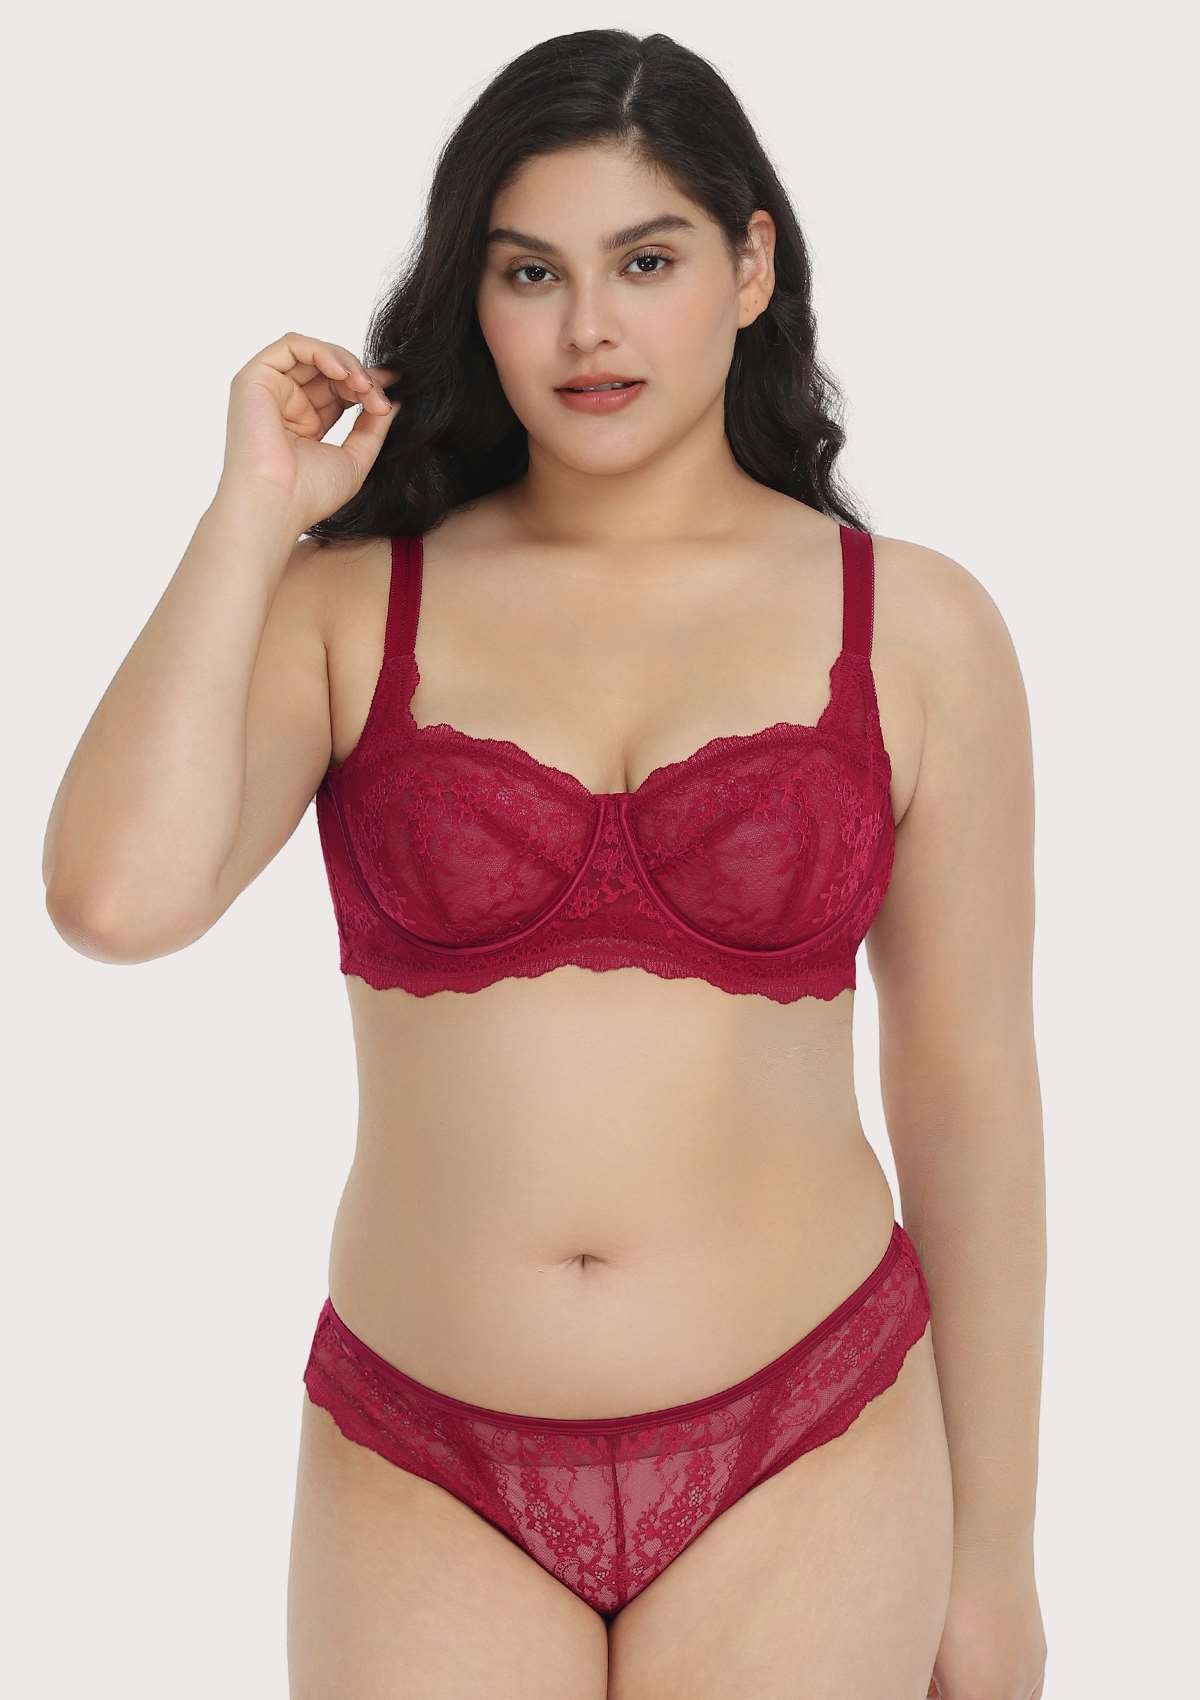 HSIA Floral Lace Unlined Bridal Balconette Bra Set - Supportive Classic - Burgundy / 34 / DDD/F